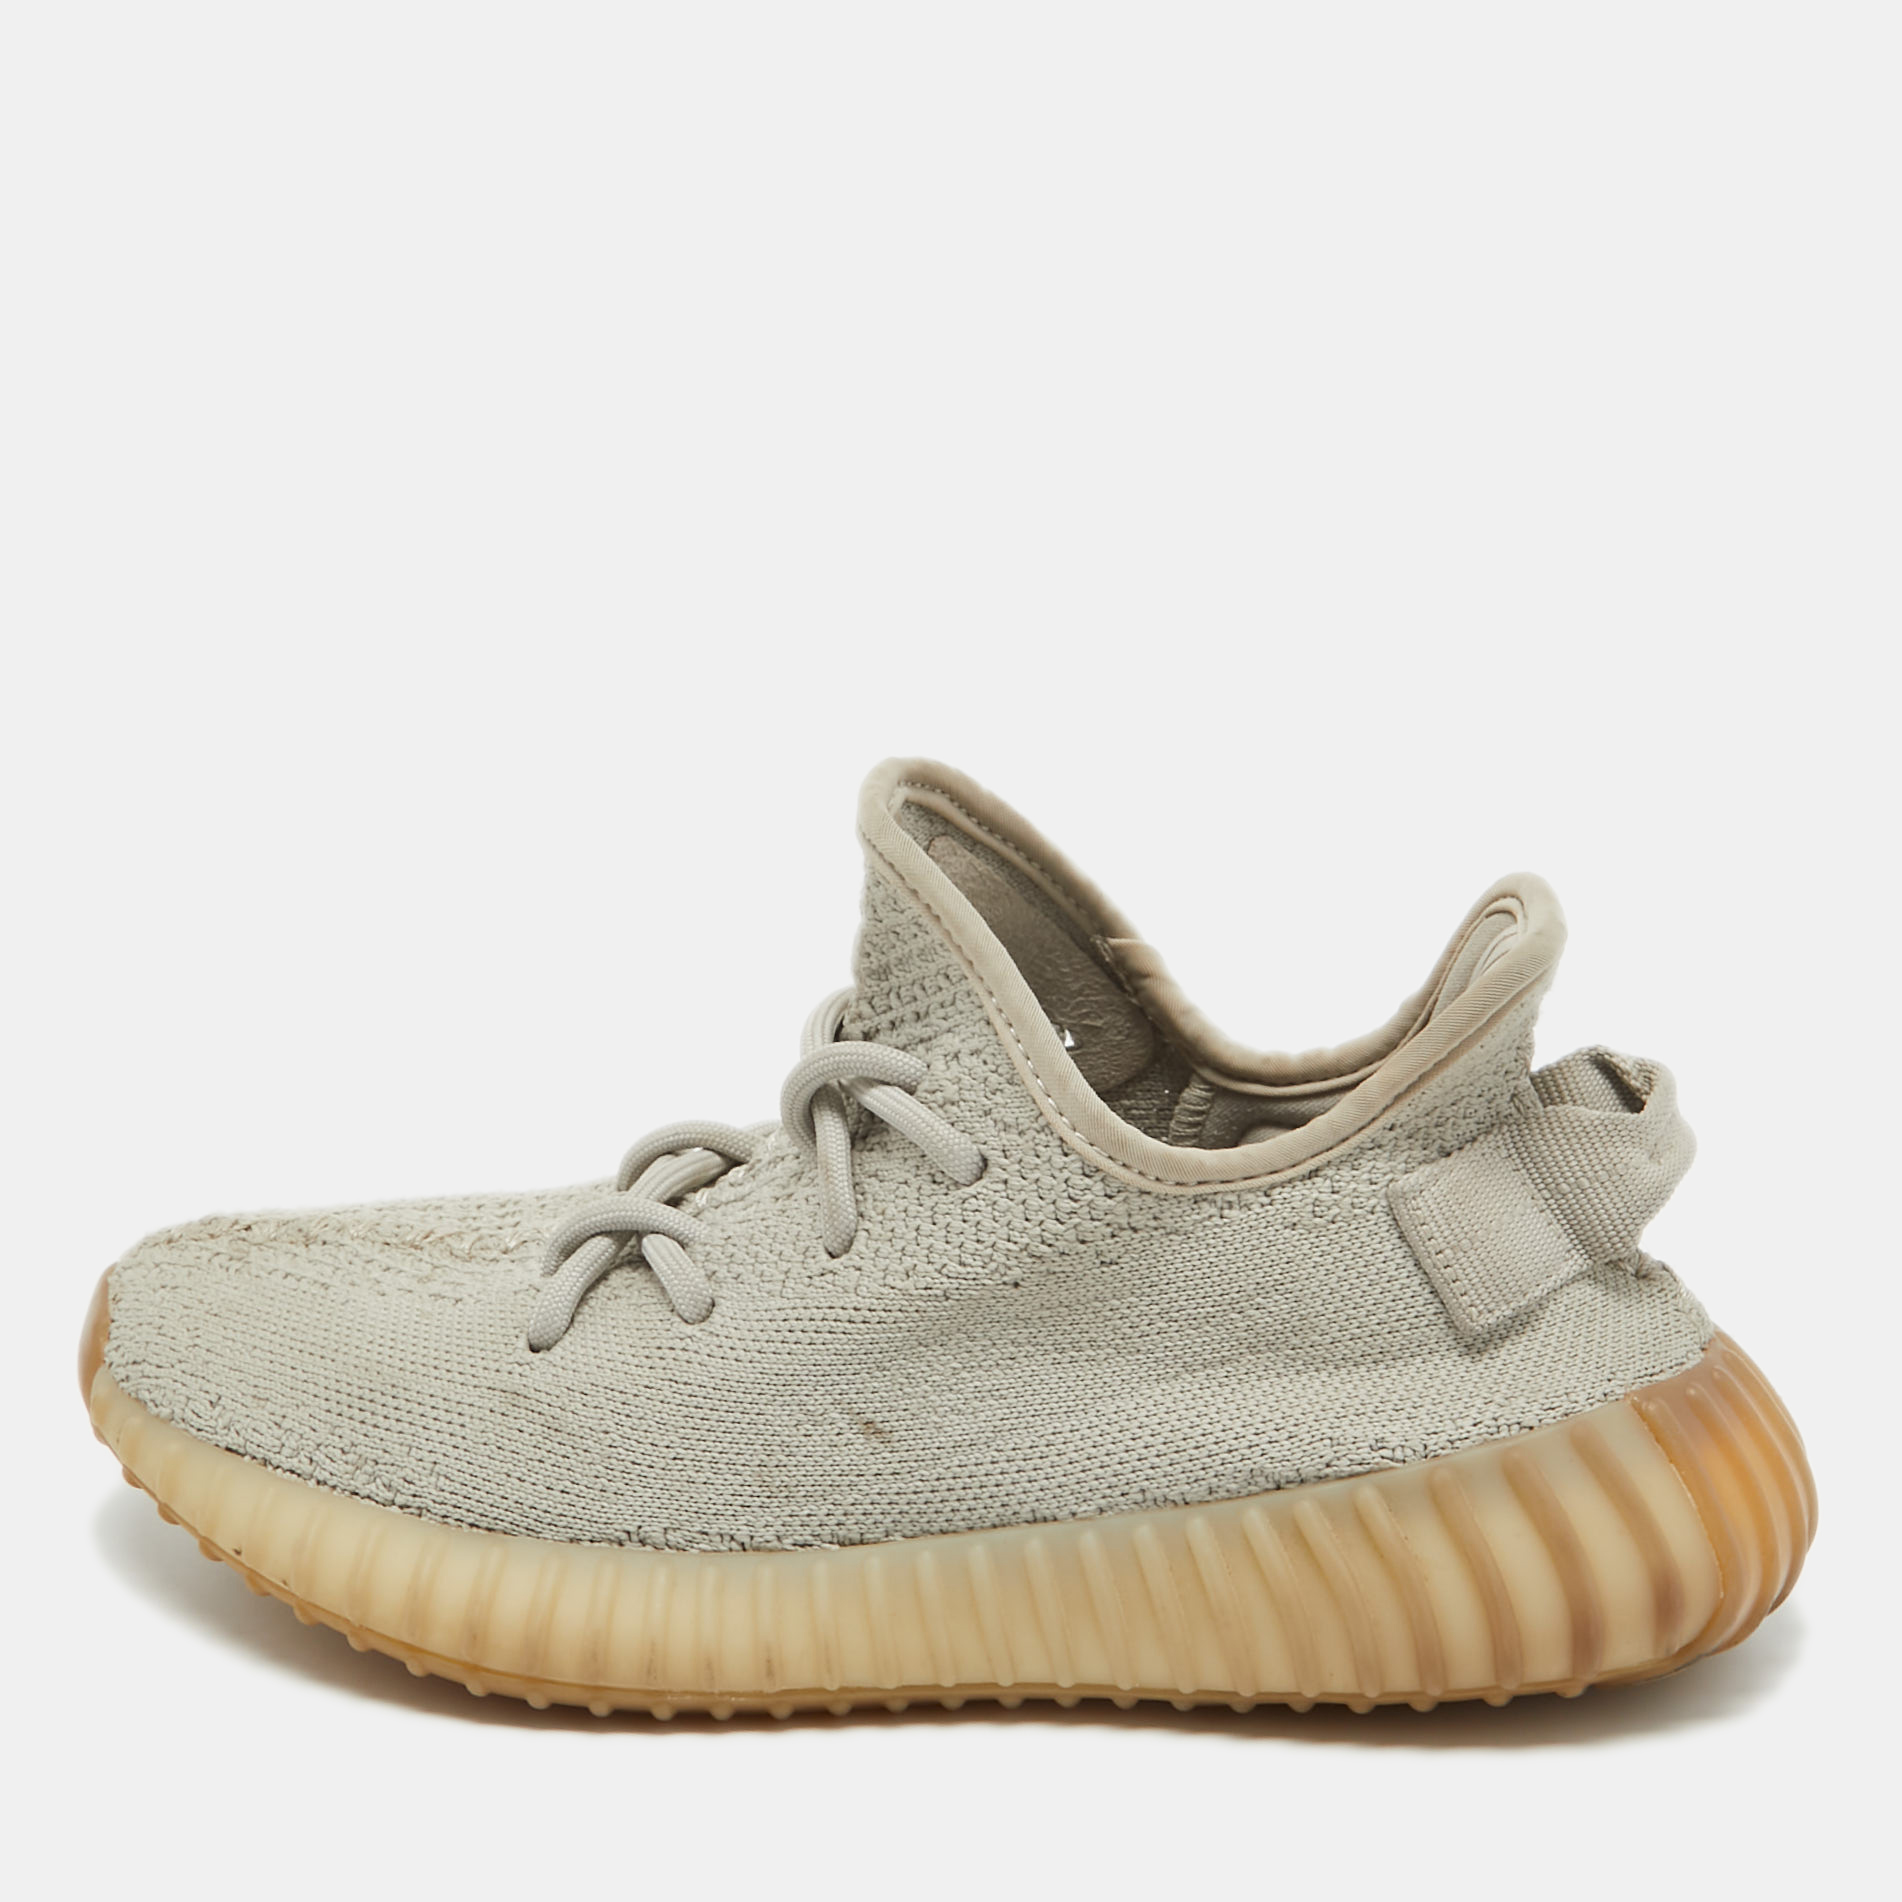 Introducing the Yeezy x adidas Boost 350 V2 Sesame sneakers where style meets comfort effortlessly. Crafted with precision the sleek grey knit fabric seamlessly merges with Boost technology ensuring unparalleled cushioning. These kicks elevate any ensemble embodying the epitome of contemporary urban fashion.